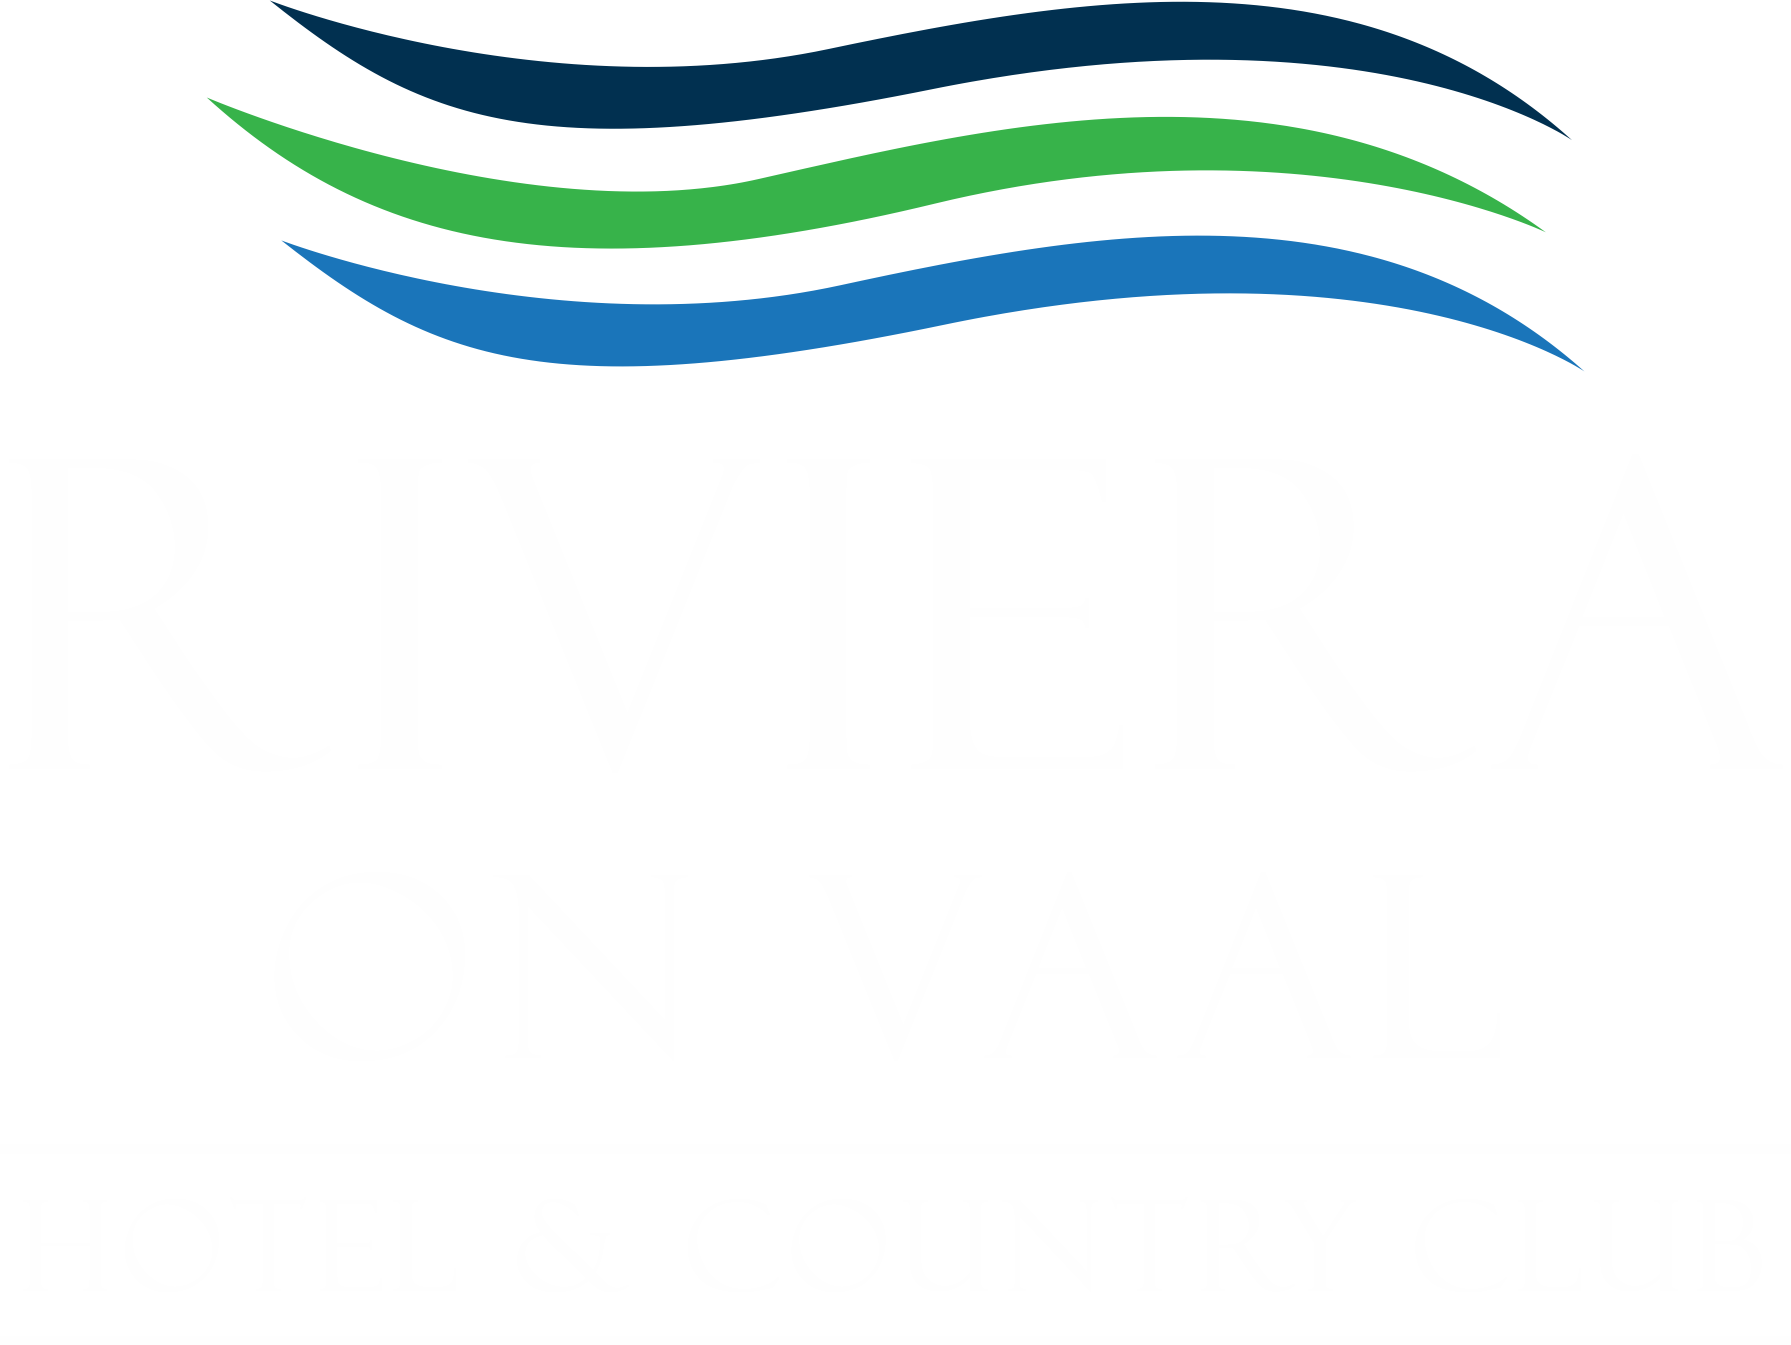 riviera on vaal boat cruise prices